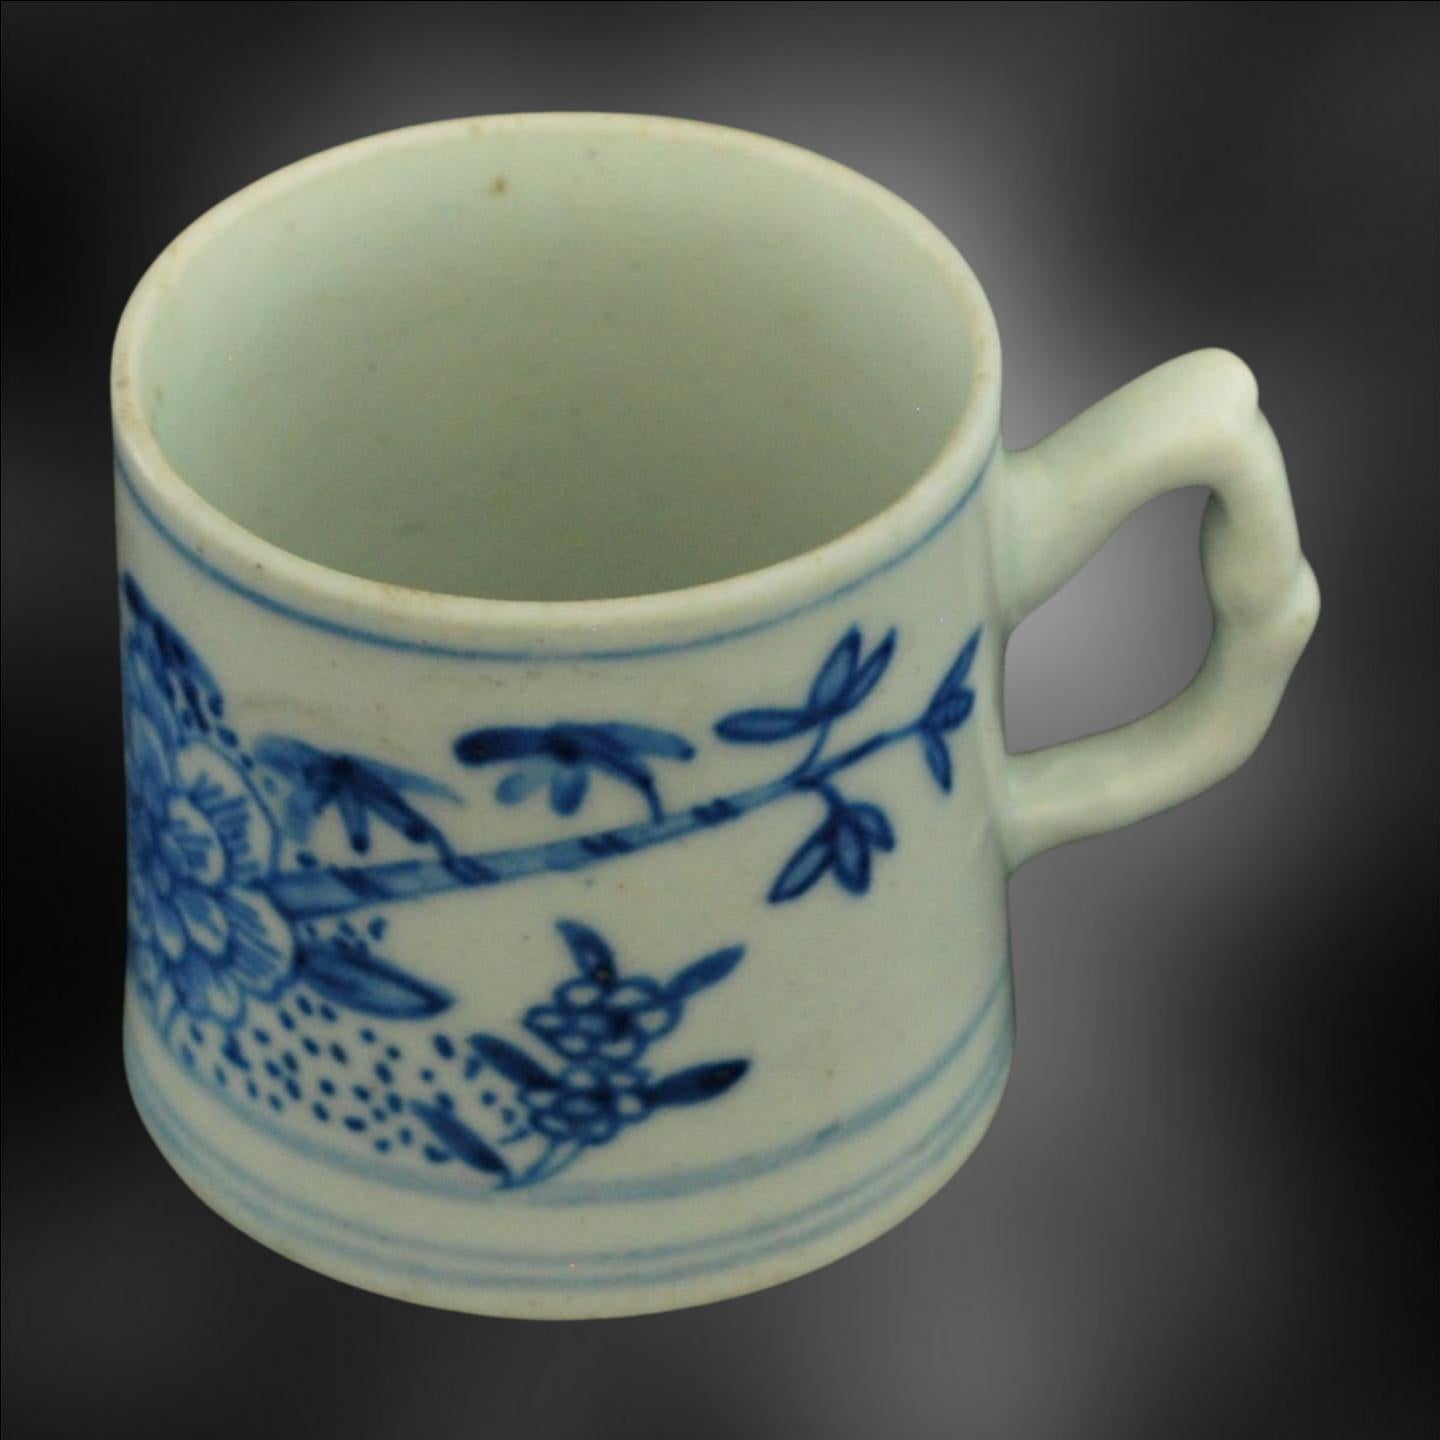 An early coffee can, painted in under-glaze blue with peonies and bamboo. The painting links with the William Pether 1754 jug.

The decoration is taken directly from Chinese examples, and was intended to compete with Chinese imports. 

Peonies